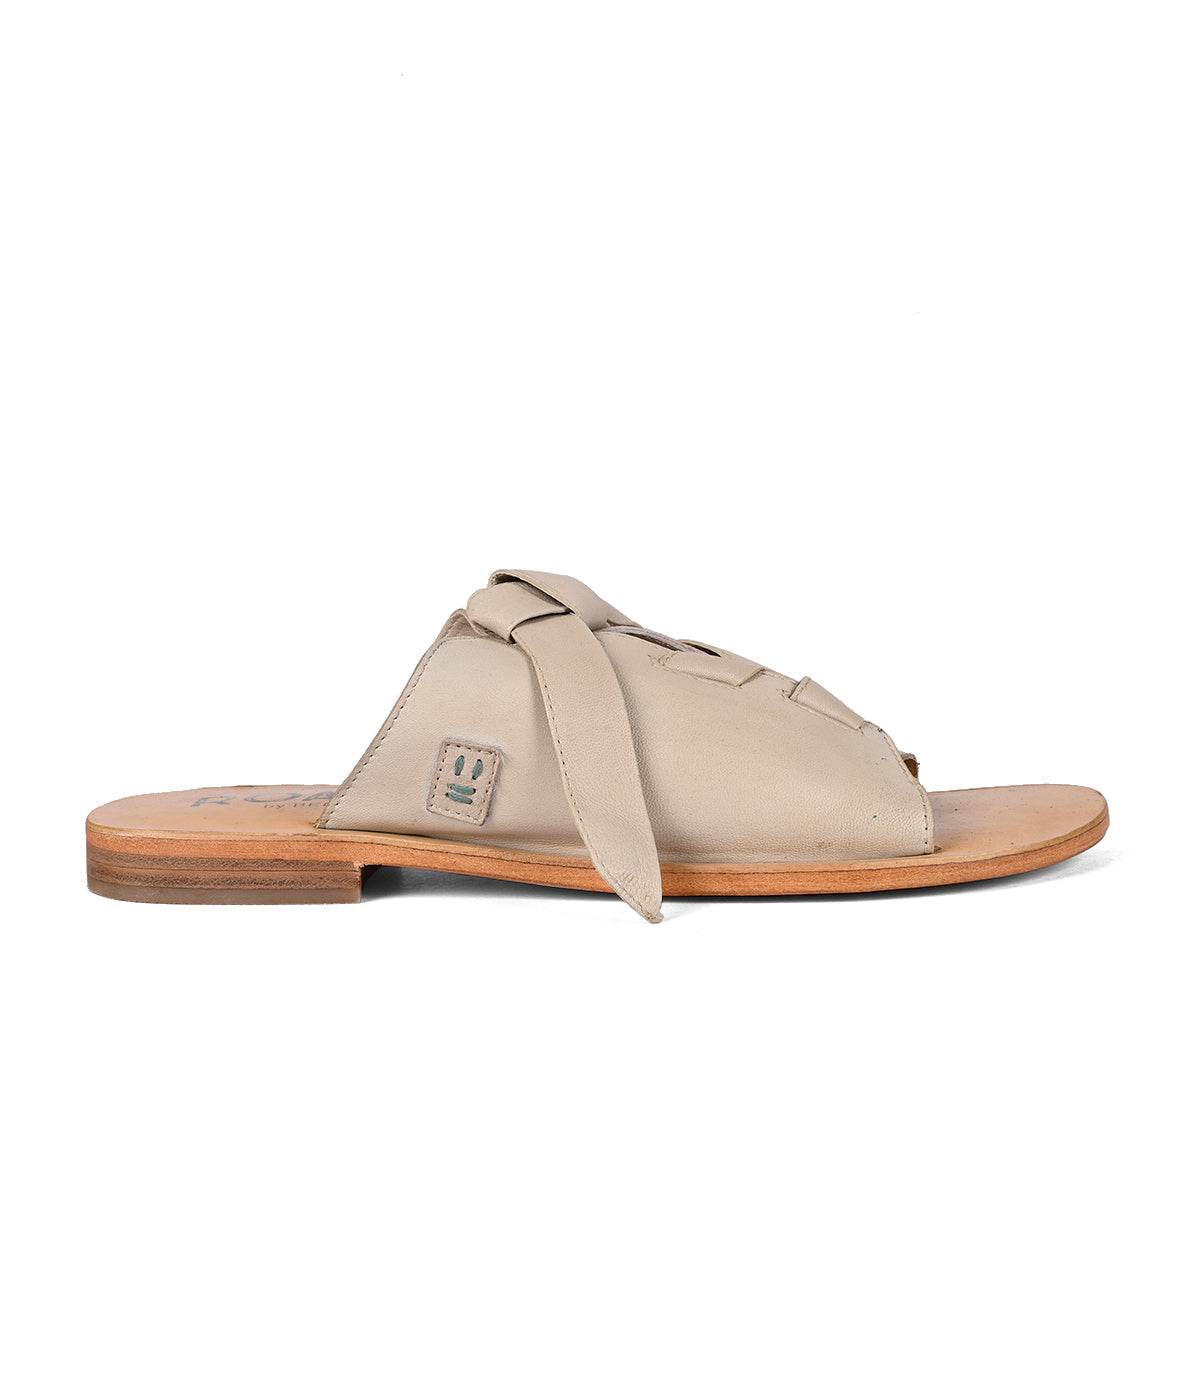 Roan Grapevine sandal with adjustable leather straps on a white background.